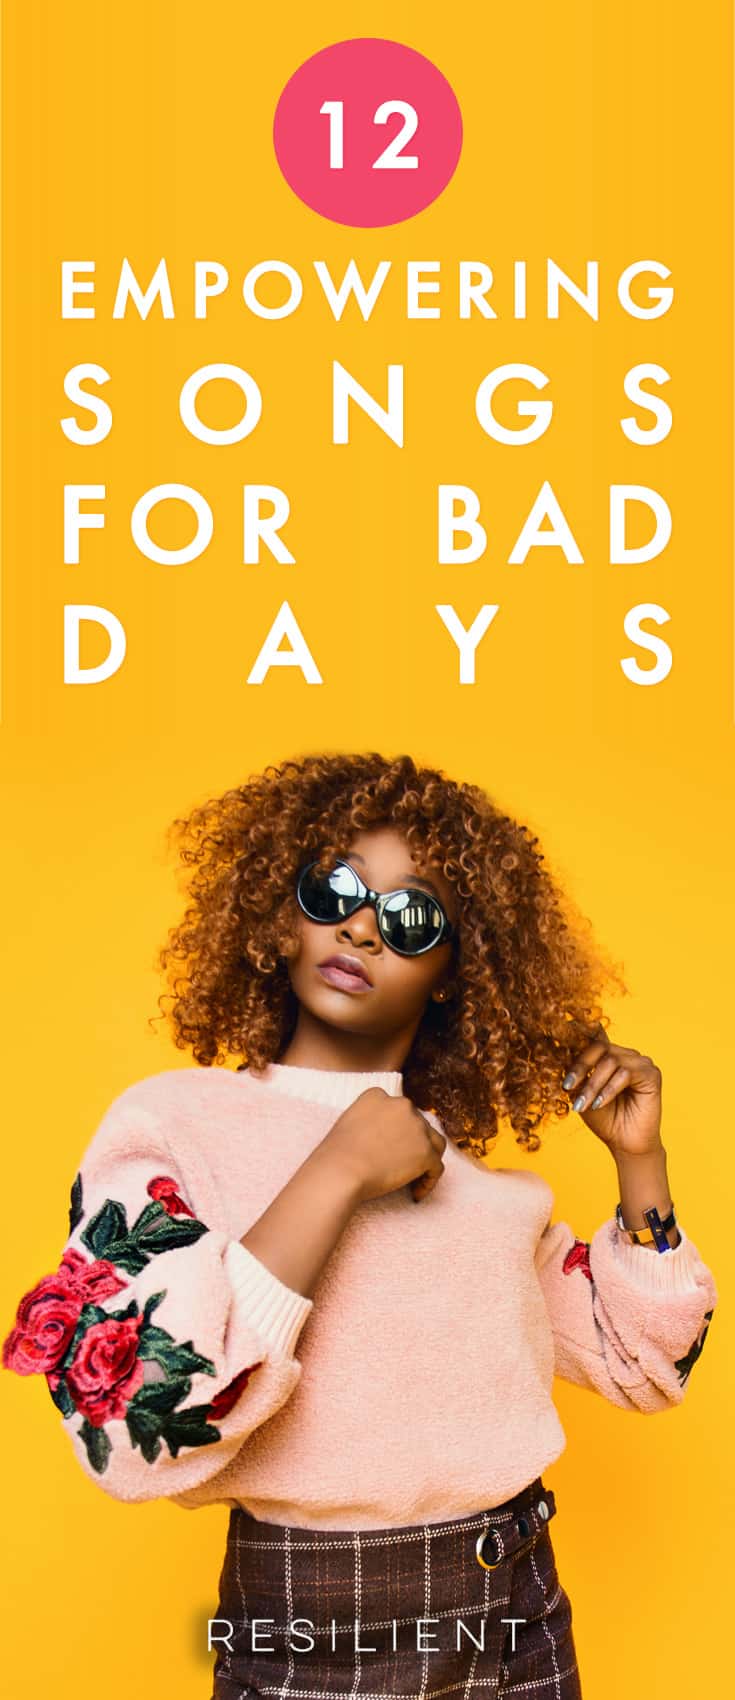 When bad days happen, it's nice to have some inspirational or motivational songs to lift your spirits and make you feel better.  Here are 12 motivational songs for bad days.